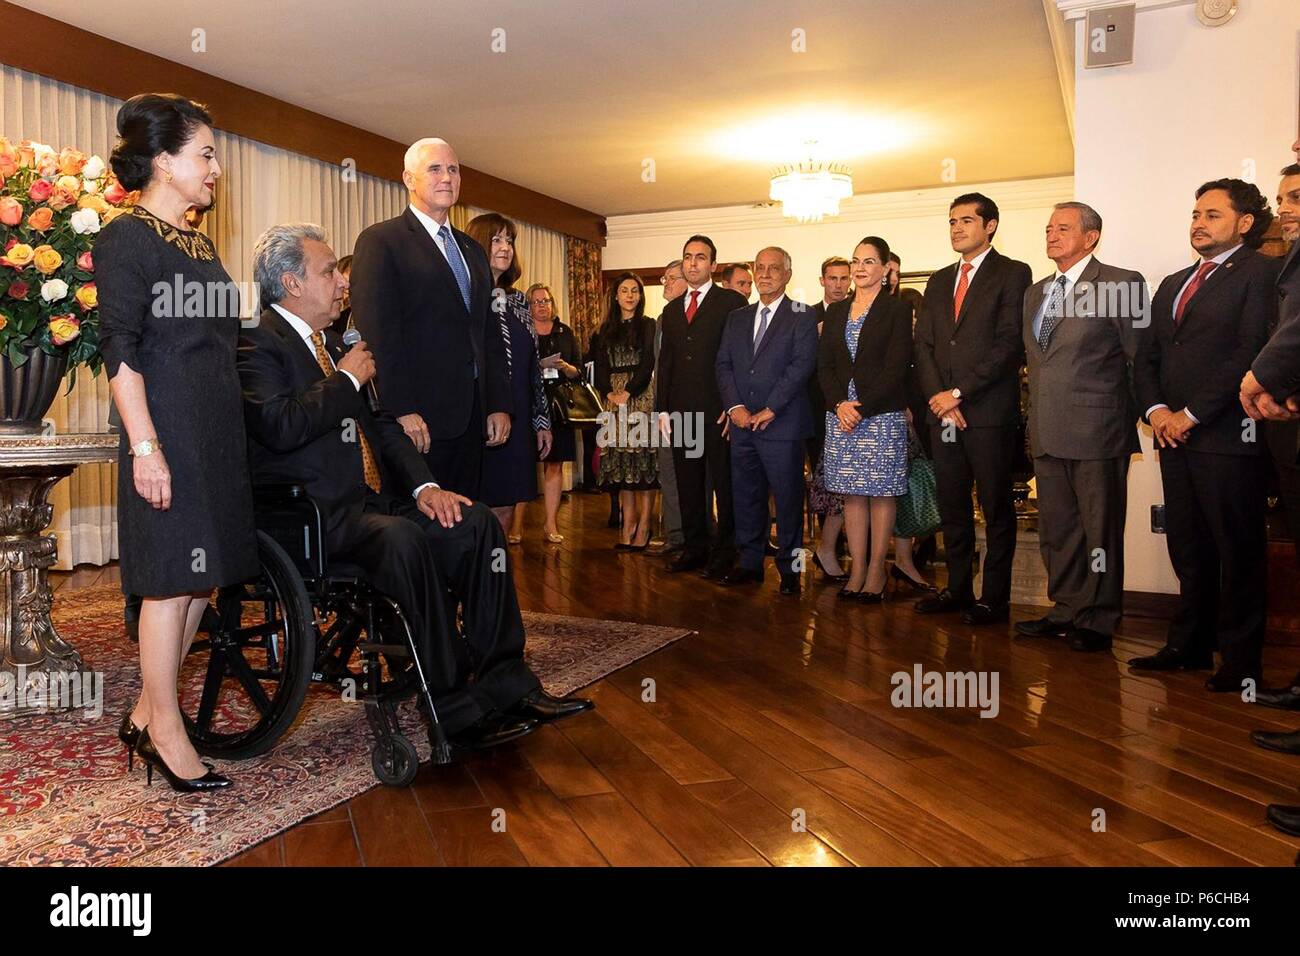 U.S. Vice President Mike Pence, center, listens as Ecuador President Lenin Moreno, left, and First Lady Rocío Gonzalez de Moreno speak during a reception at the government palace June 28, 2018 in Quito, Ecuador. Stock Photo